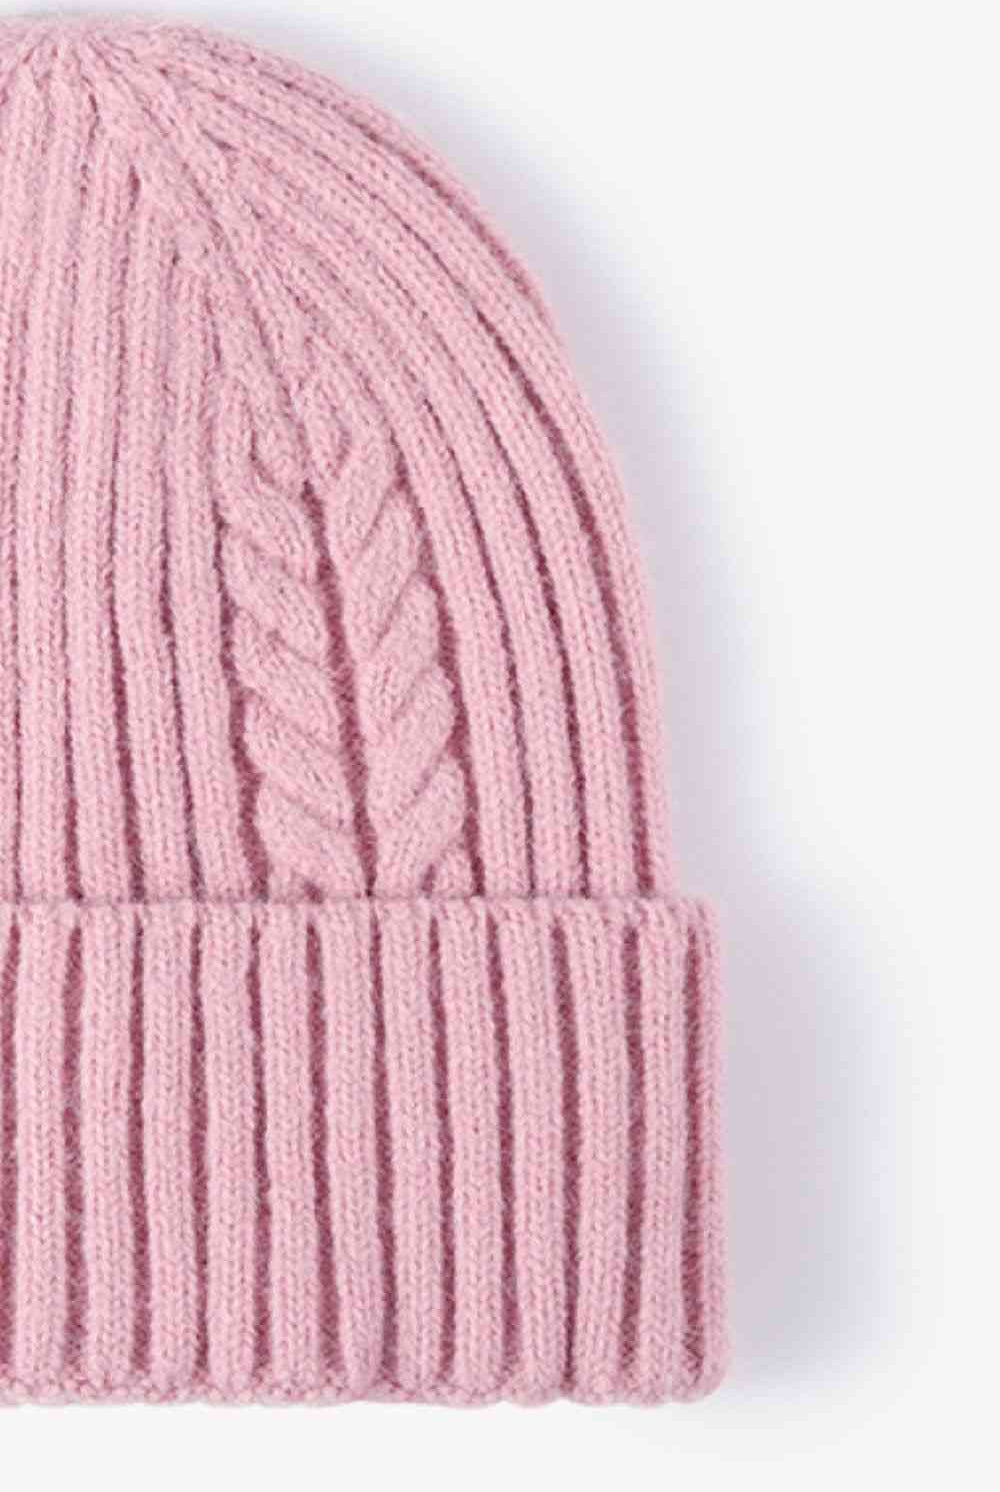 Light Gray Cable-Knit Cuff Beanie Winter Accessories